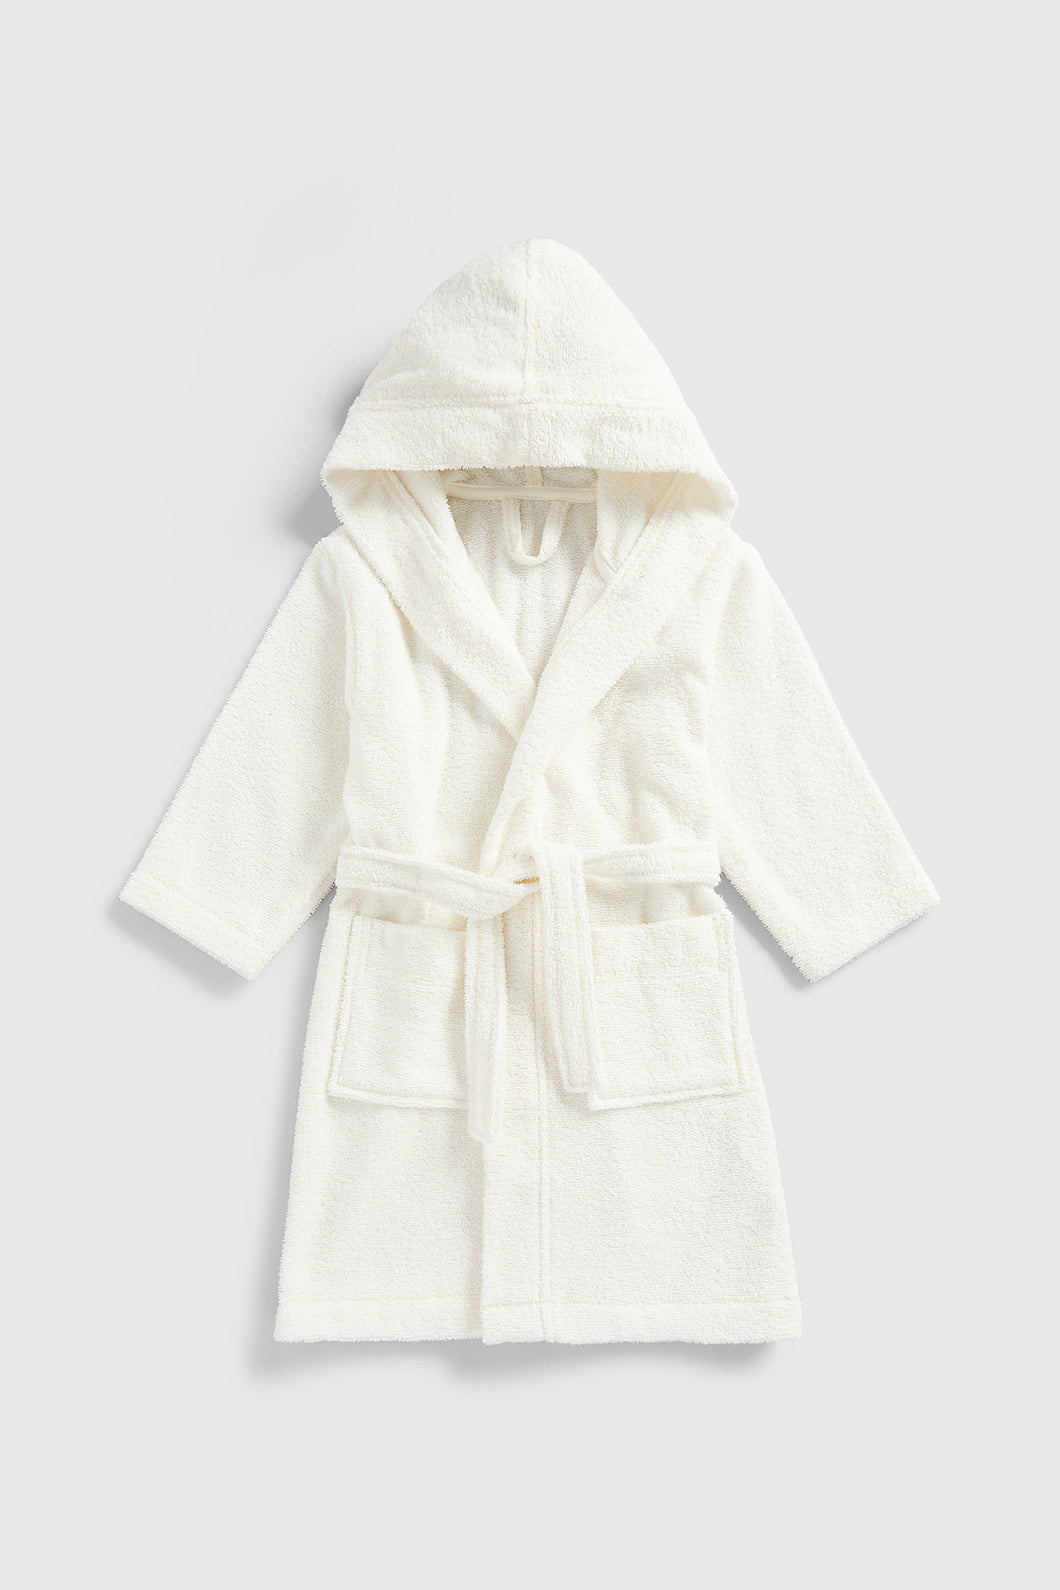 Mothercare White Towelling Hooded Robe